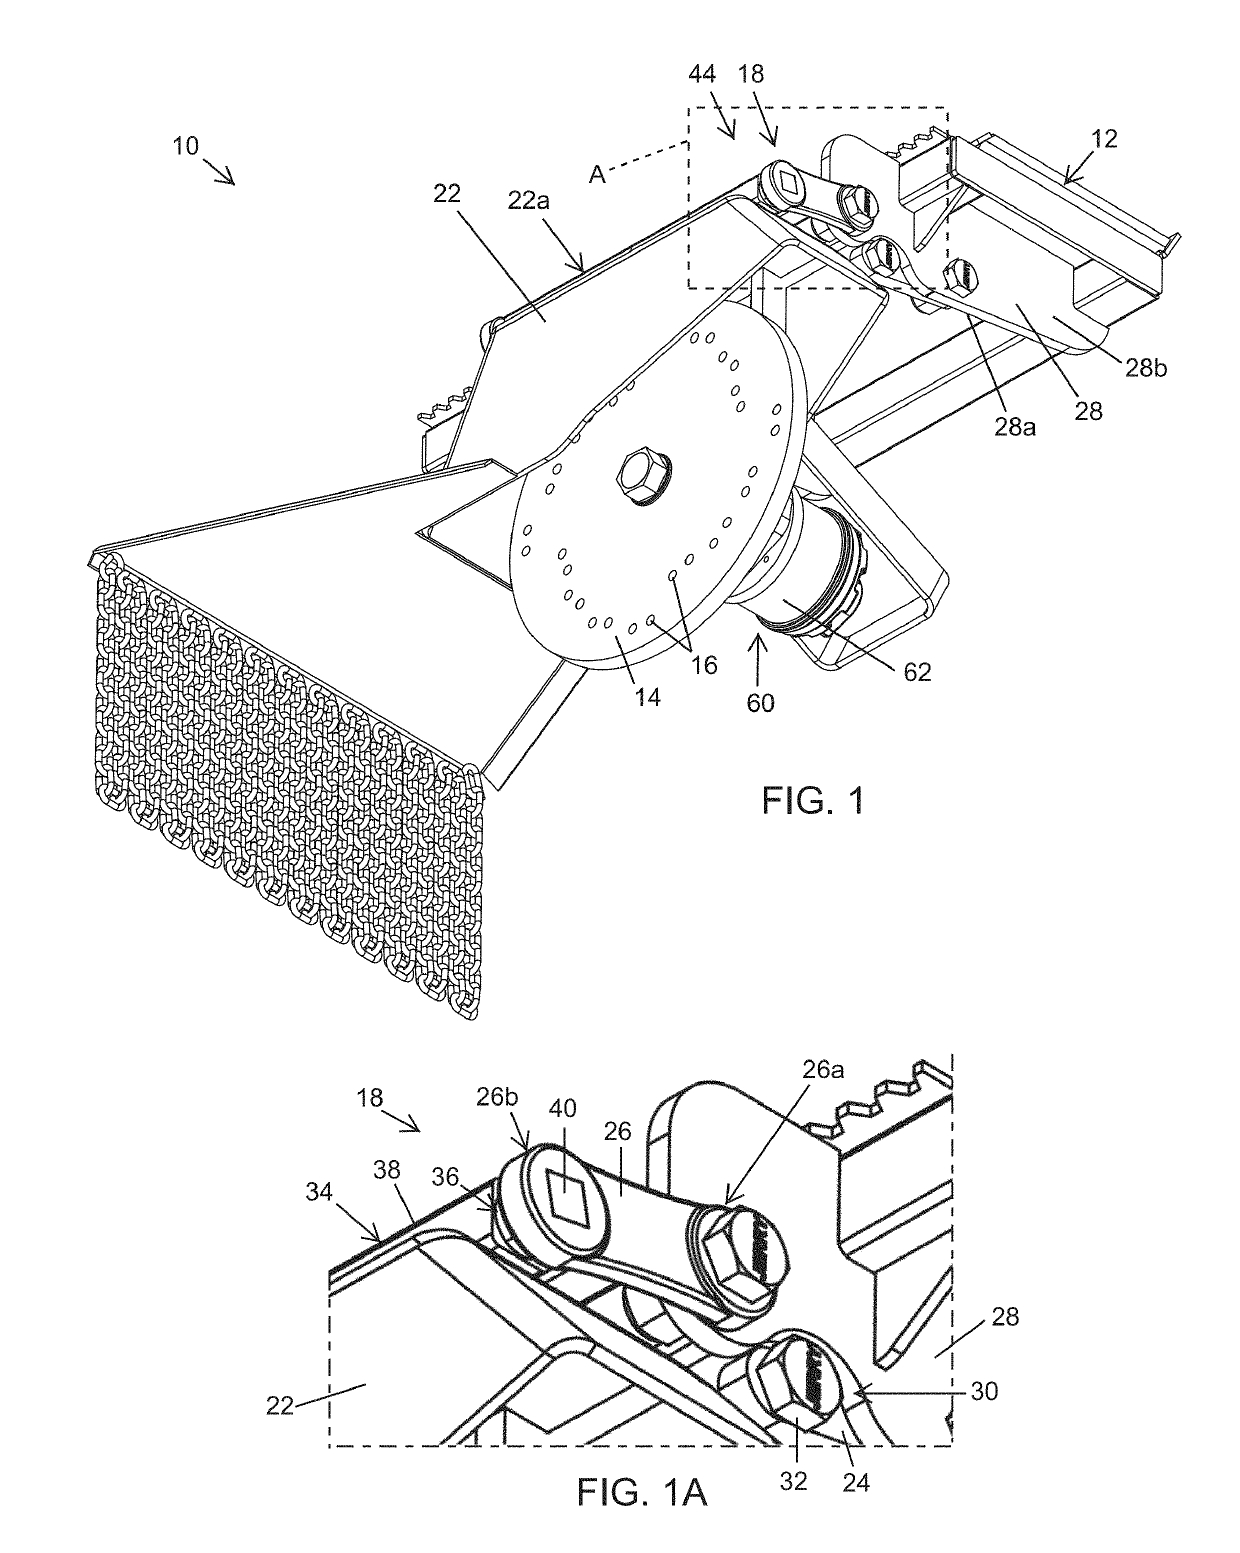 Stump grinder with cutting wheel moving and stabilizing assembly